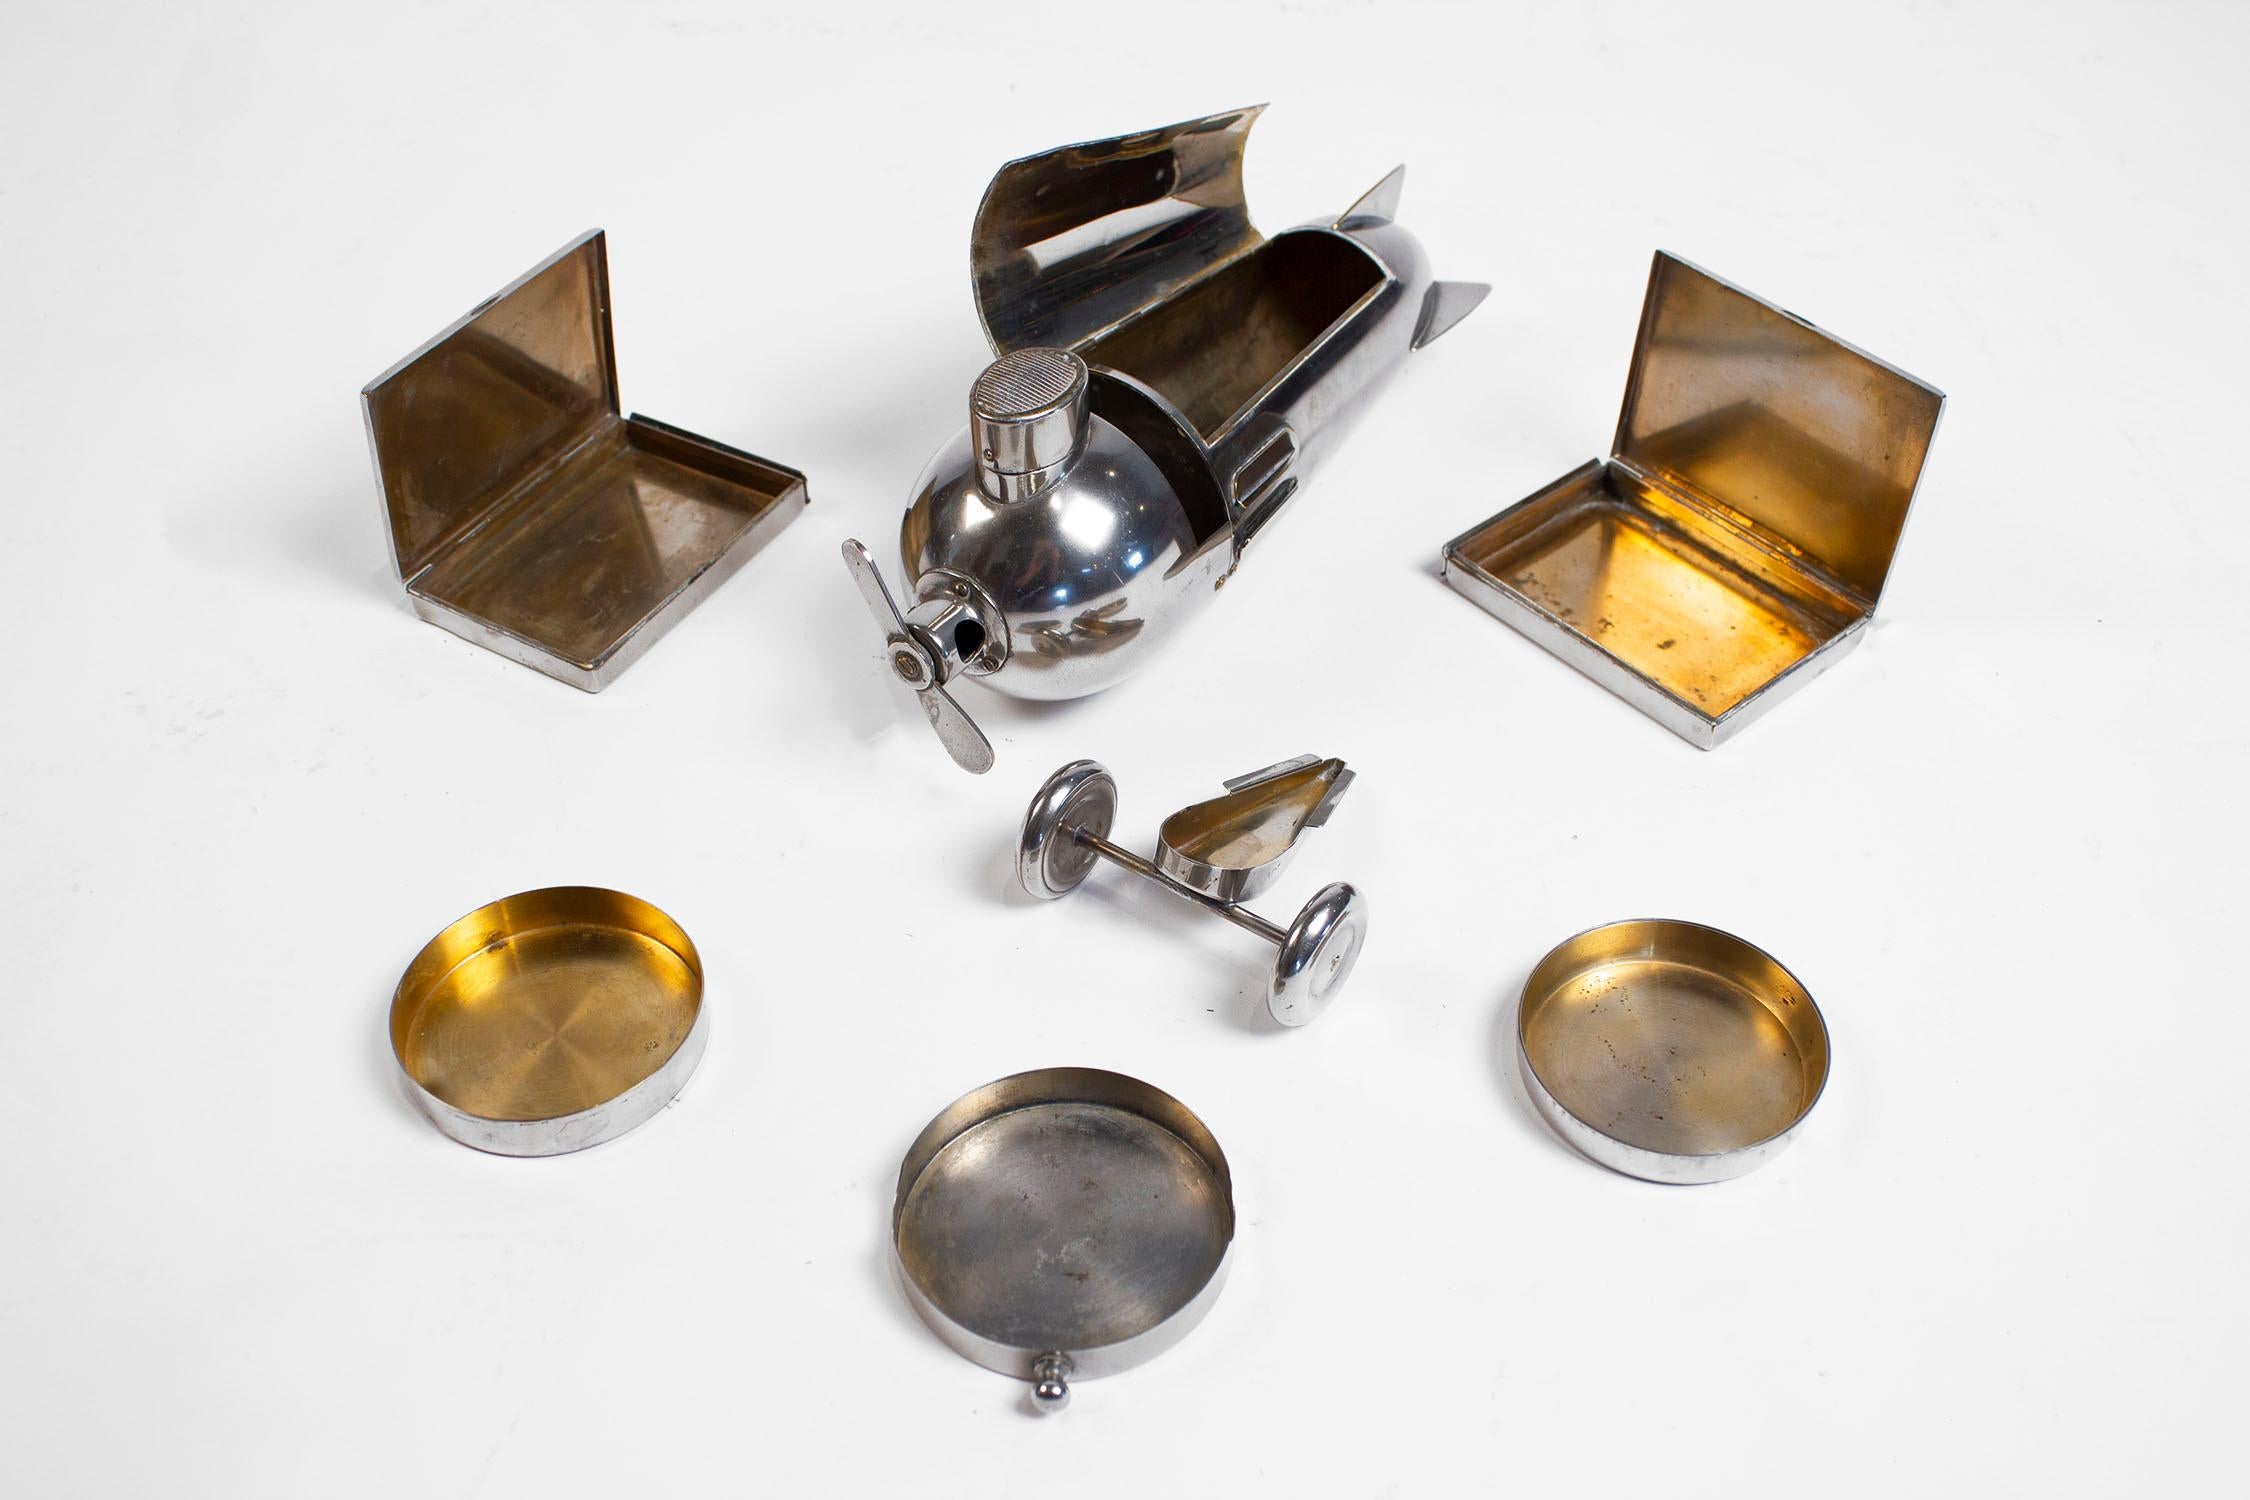 Art Deco Airplane Smoker's Set by J.A. Henckels 1930s For Sale 3